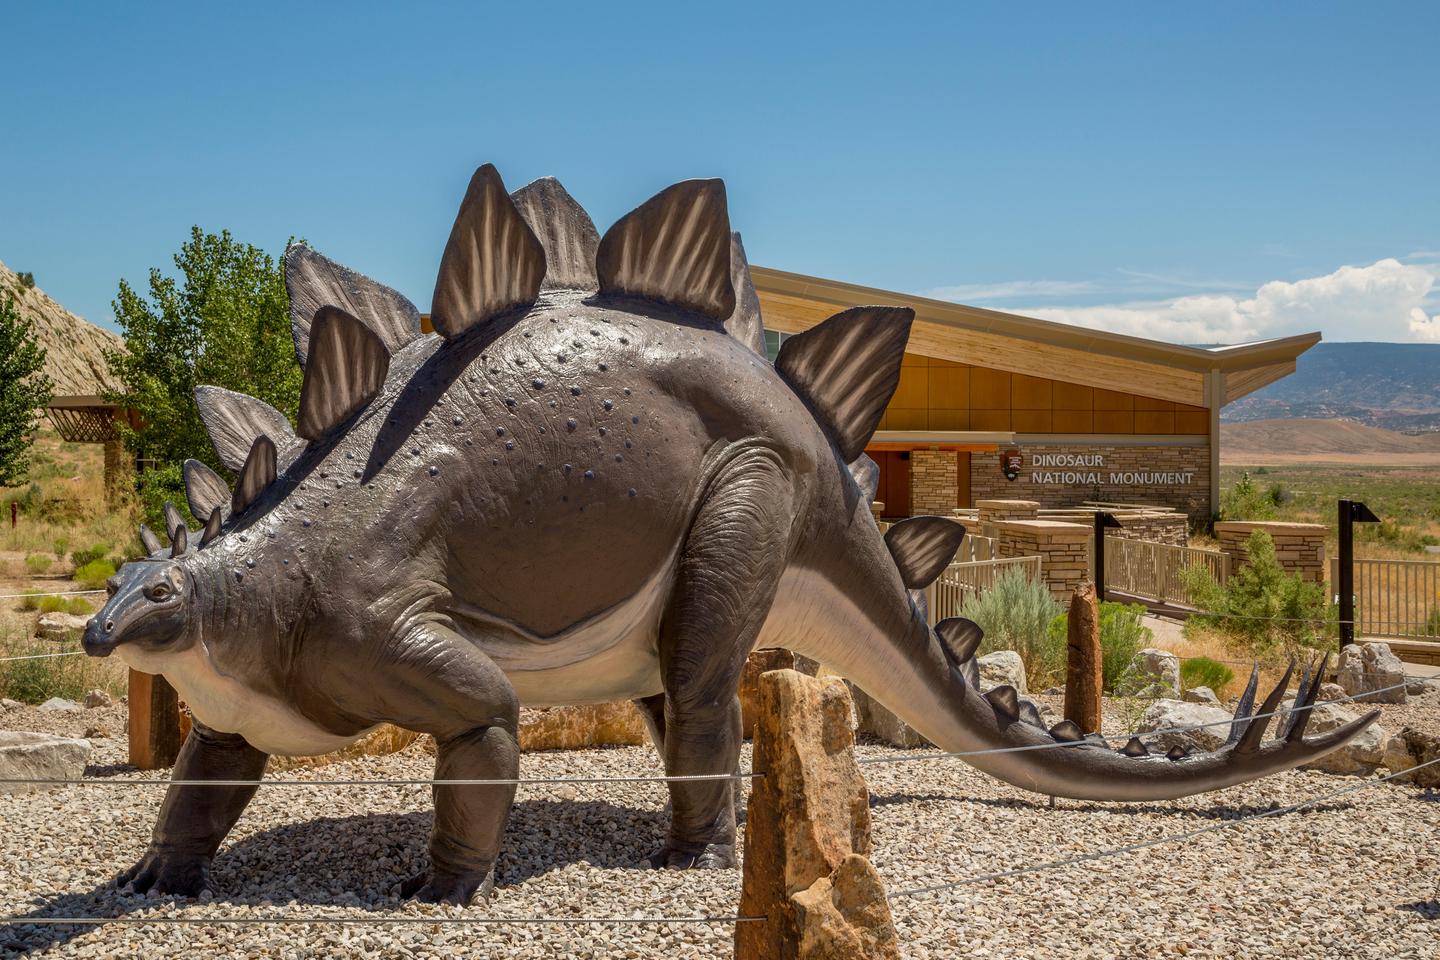 Stegosaurus Statue at the Entrance to the Quarry Visitor CenterThe historic Sinclair Stegosaurus statue greets visitors as the arrive at the Quarry Visitor Center